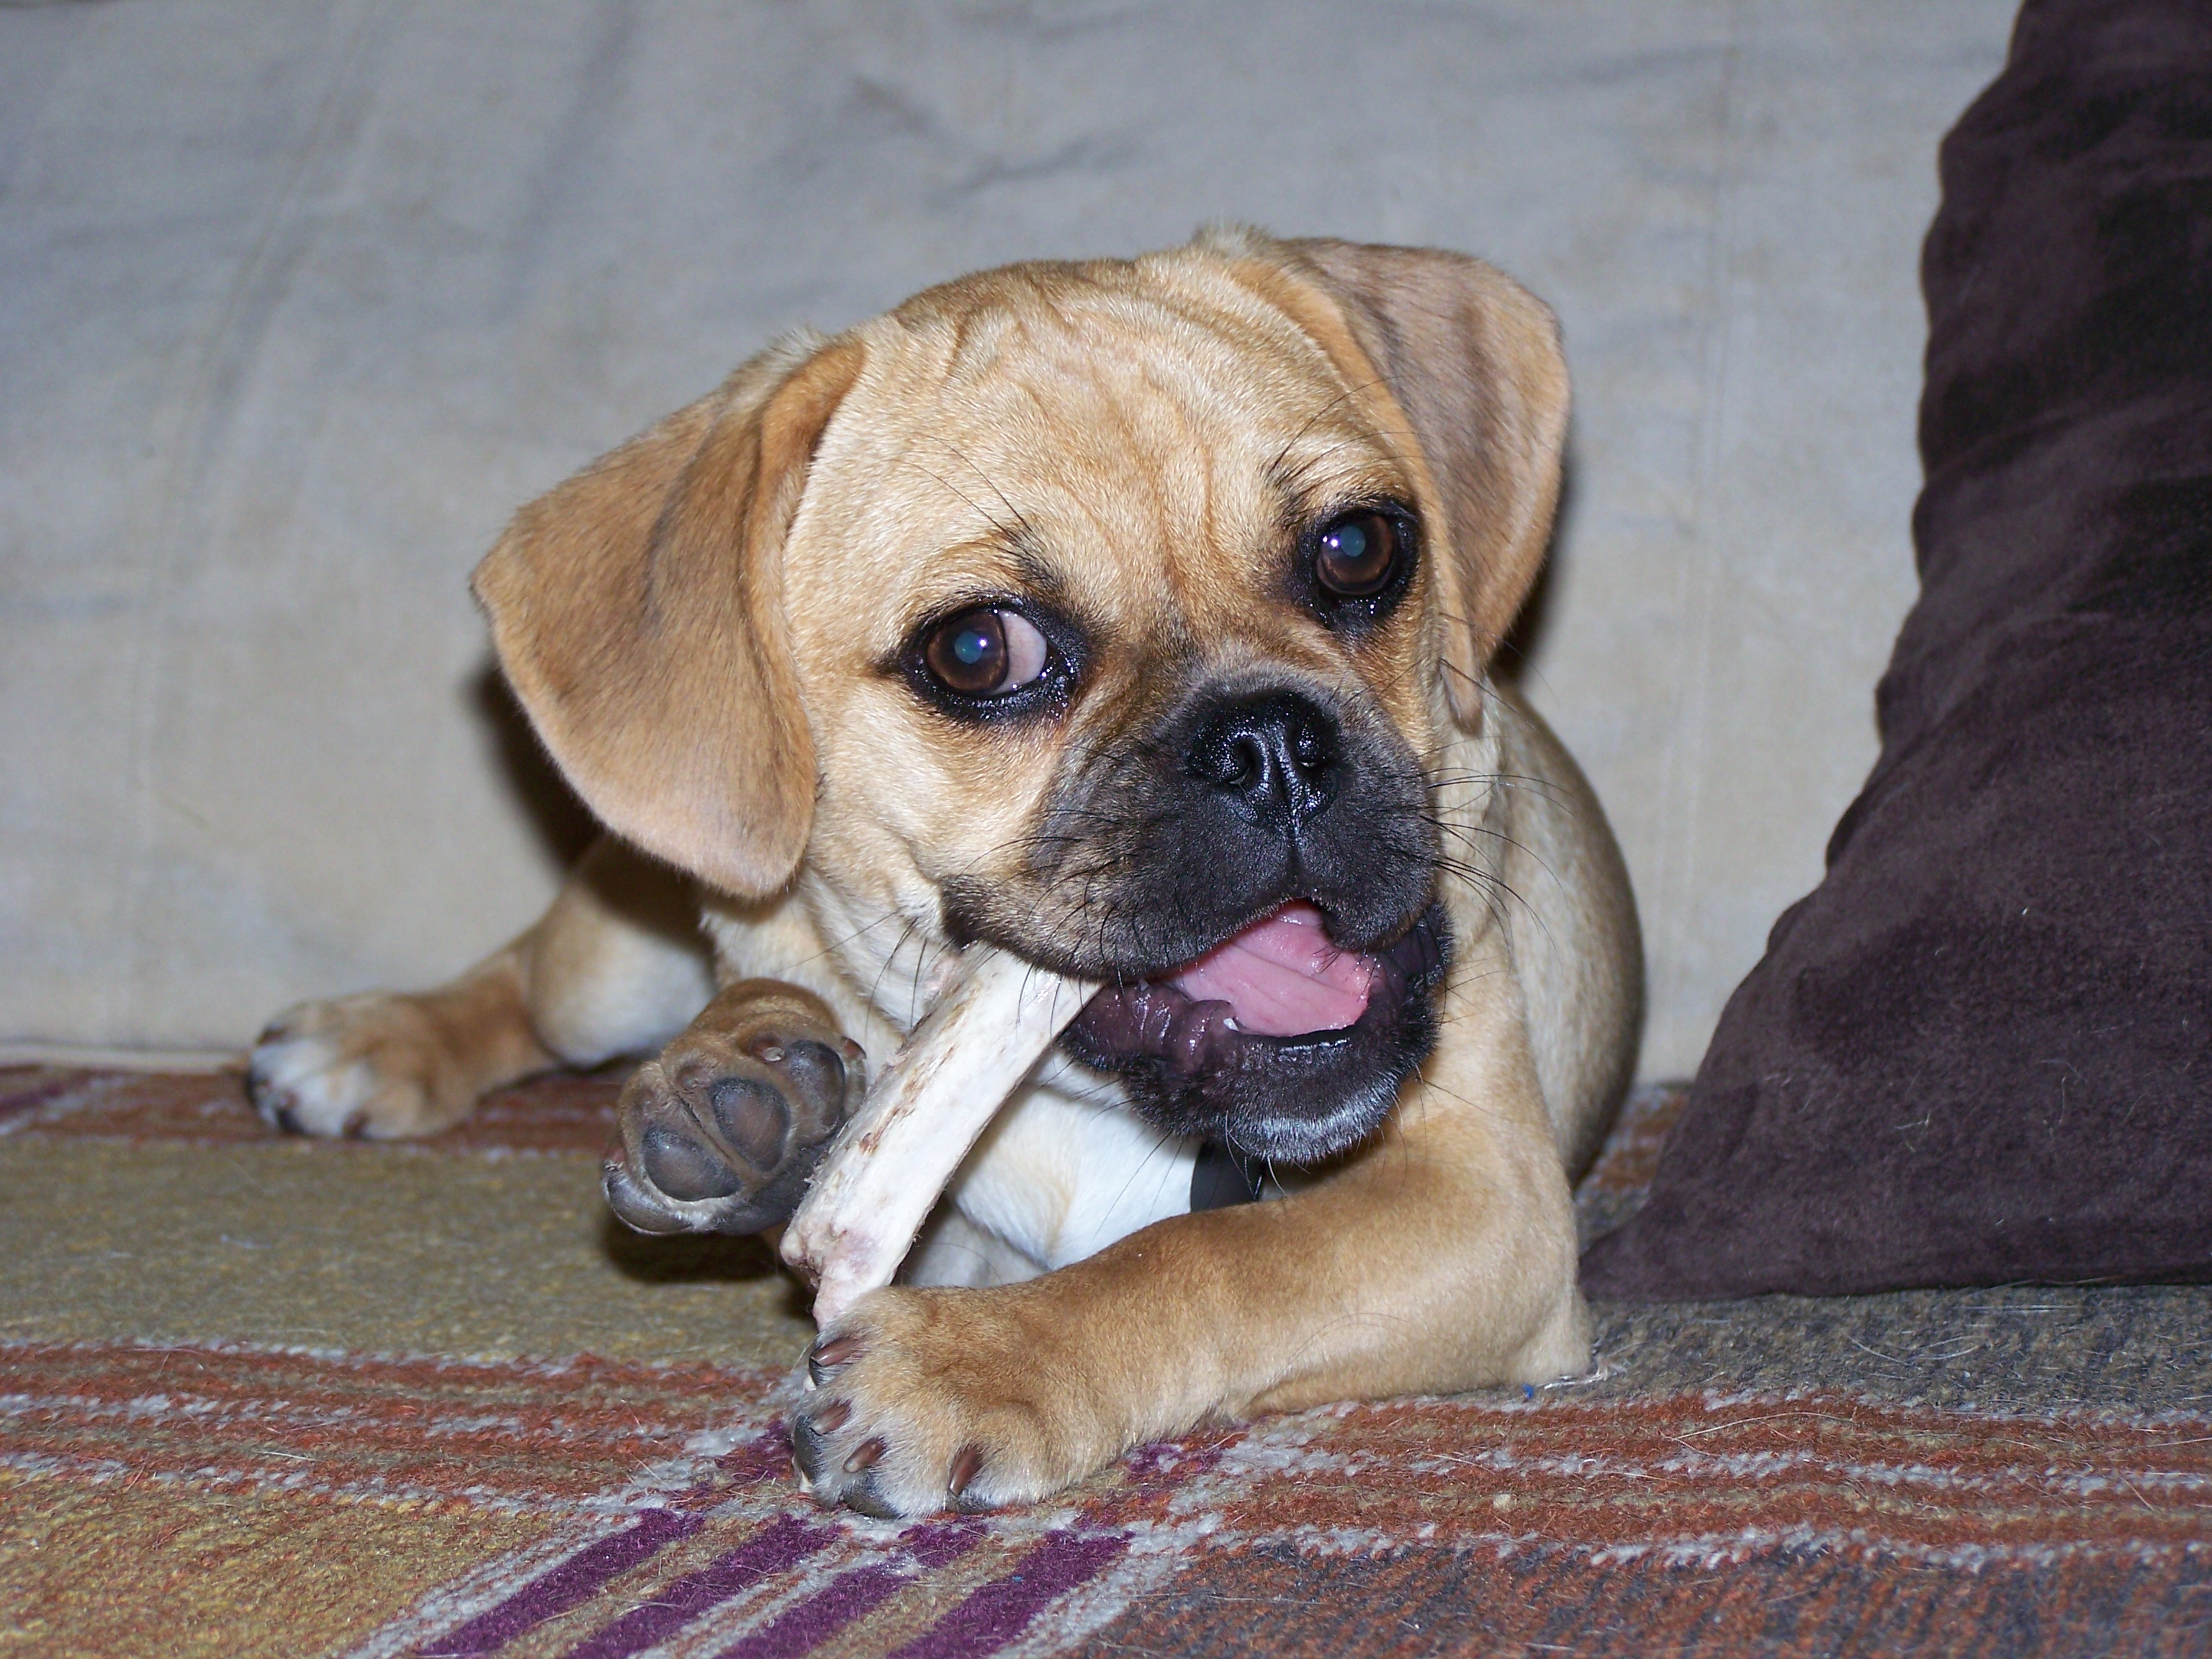 raw meaty bones for small dogs